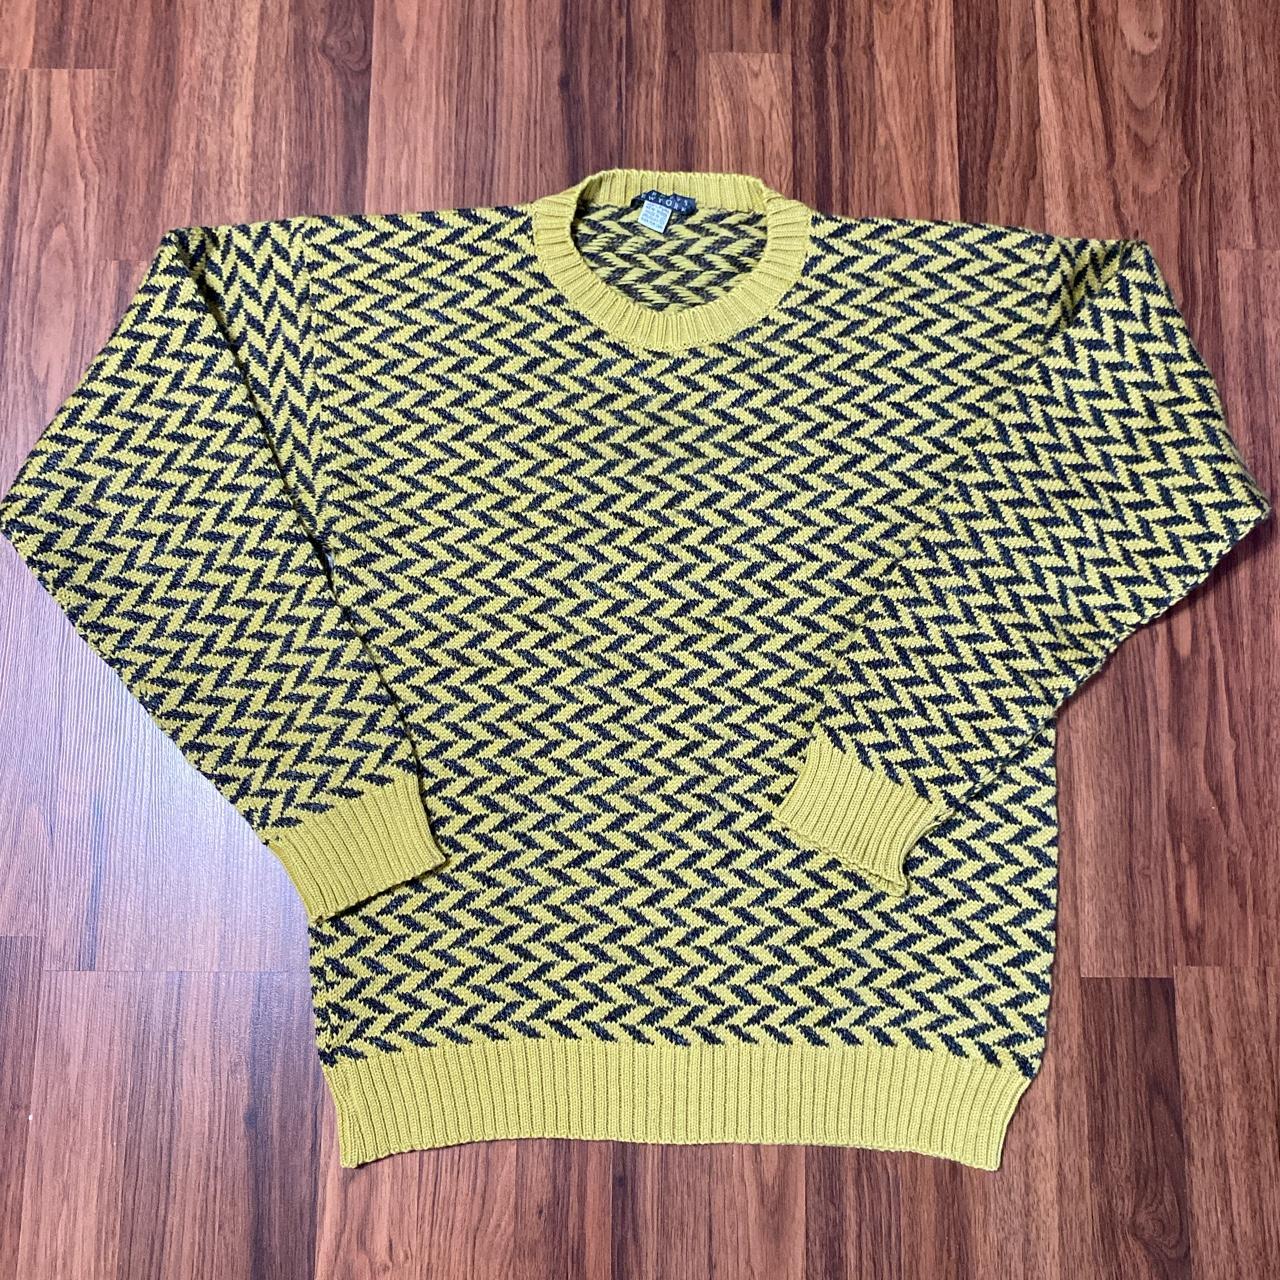 Barney's Men's Yellow and Grey Jumper